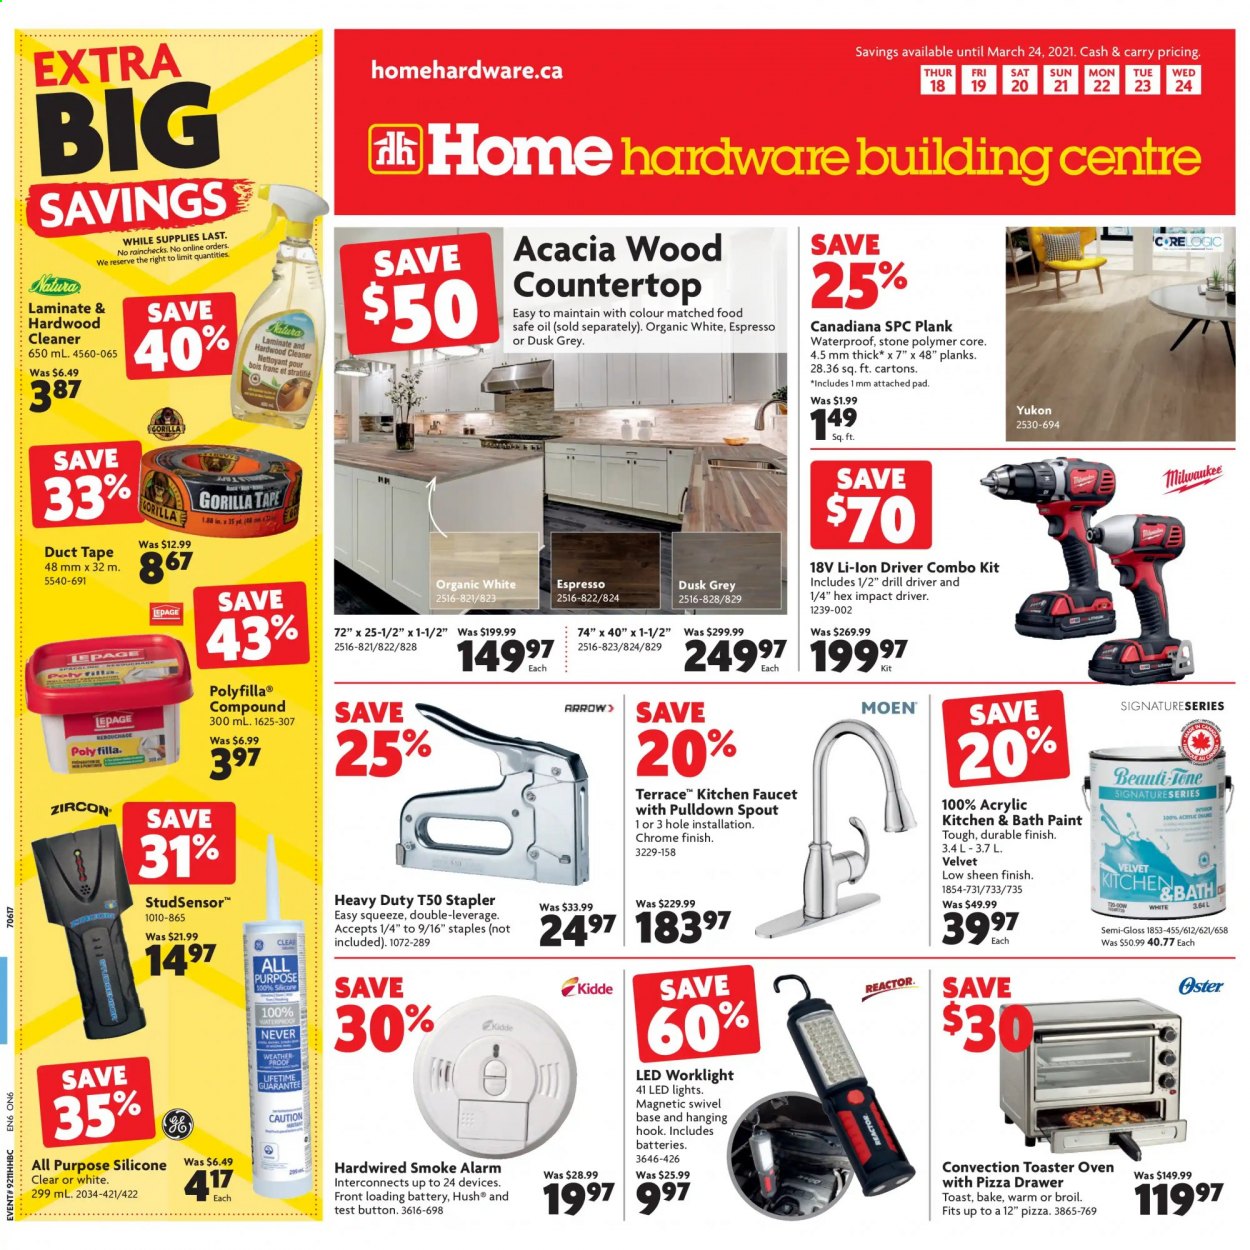 thumbnail - Home Hardware Building Centre Flyer - March 18, 2021 - March 24, 2021 - Sales products - cleaner, faucet, paint, LED light, Milwaukee, drill, impact driver, combo kit. Page 1.